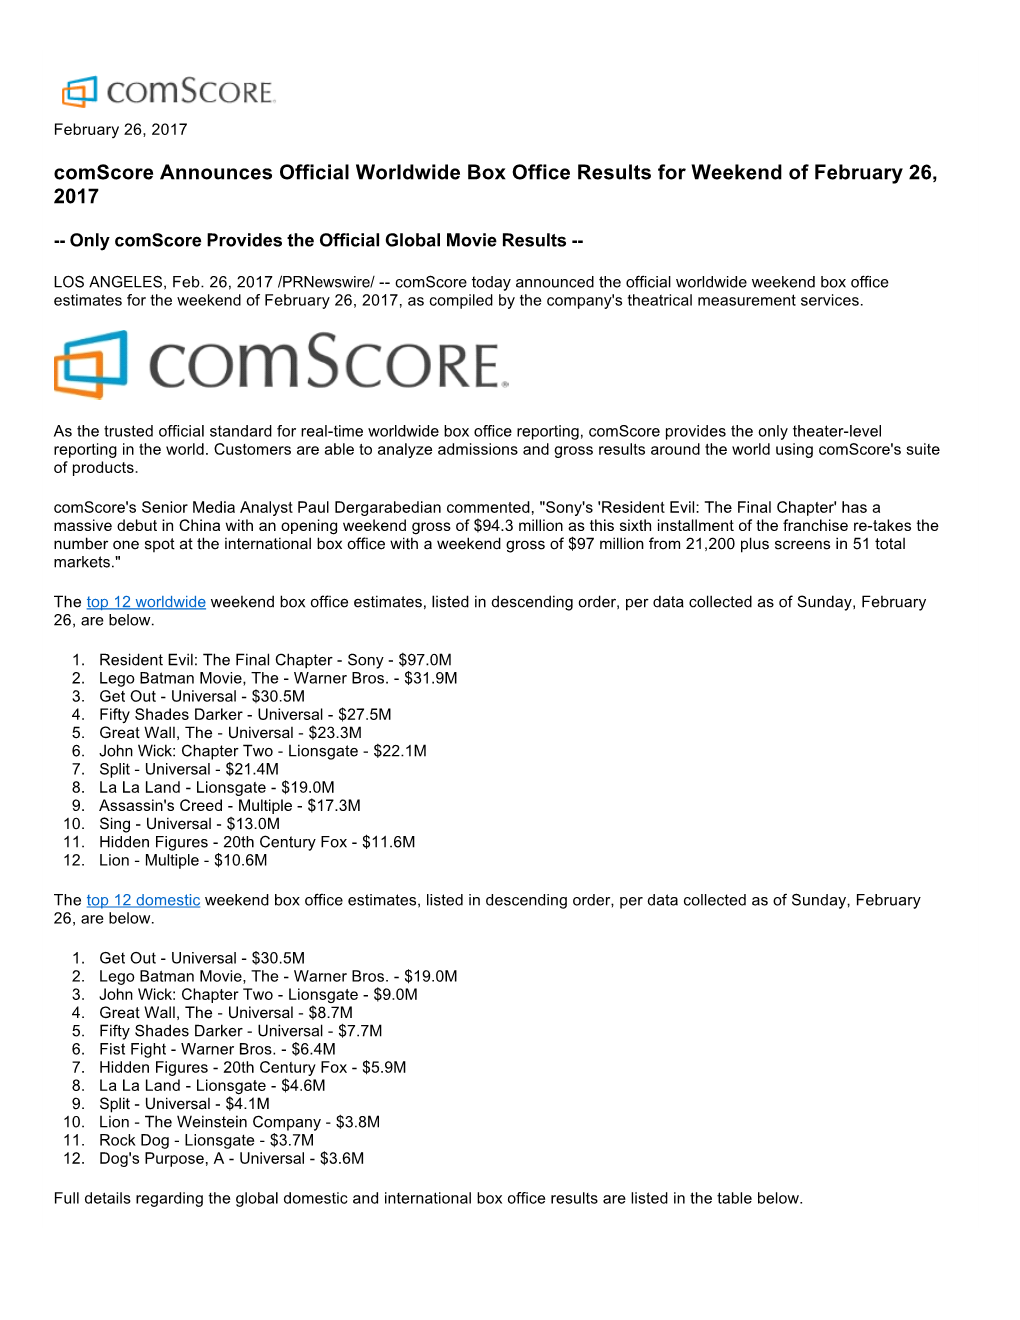 Comscore Announces Official Worldwide Box Office Results for Weekend of February 26, 2017